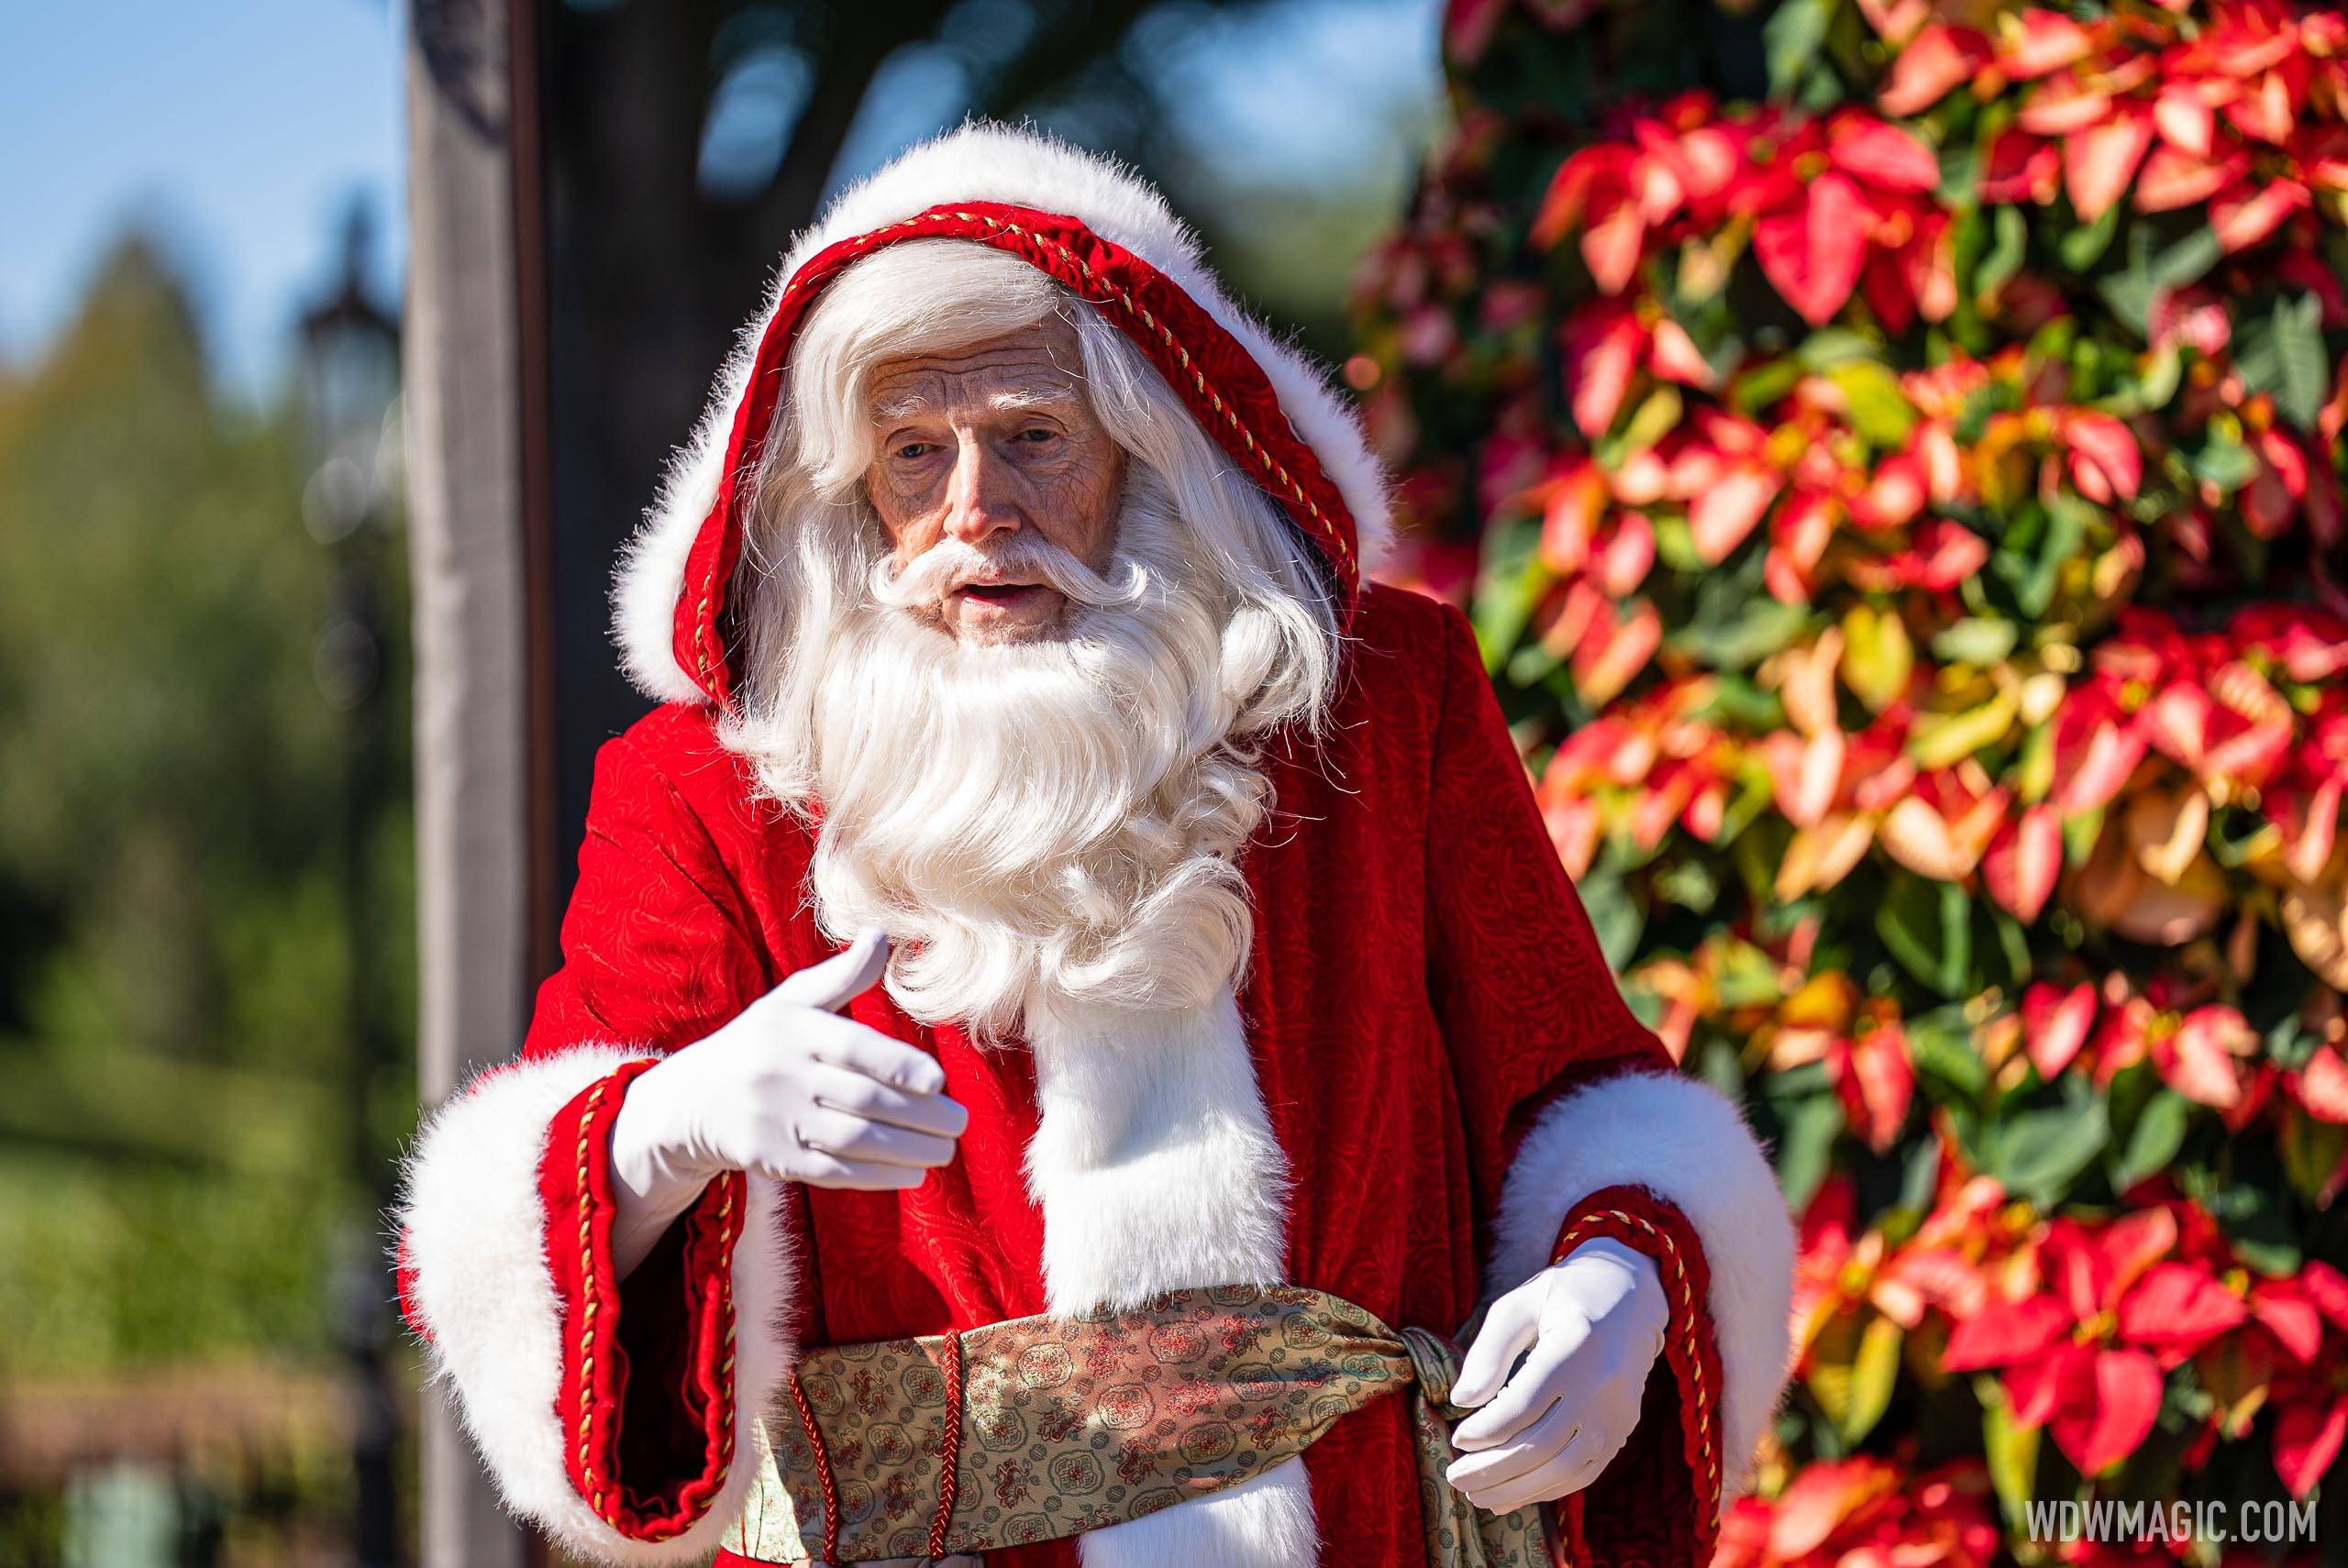 Full Holiday Storyteller line-up and schedule for the 2022 EPCOT International Festival of the Holidays